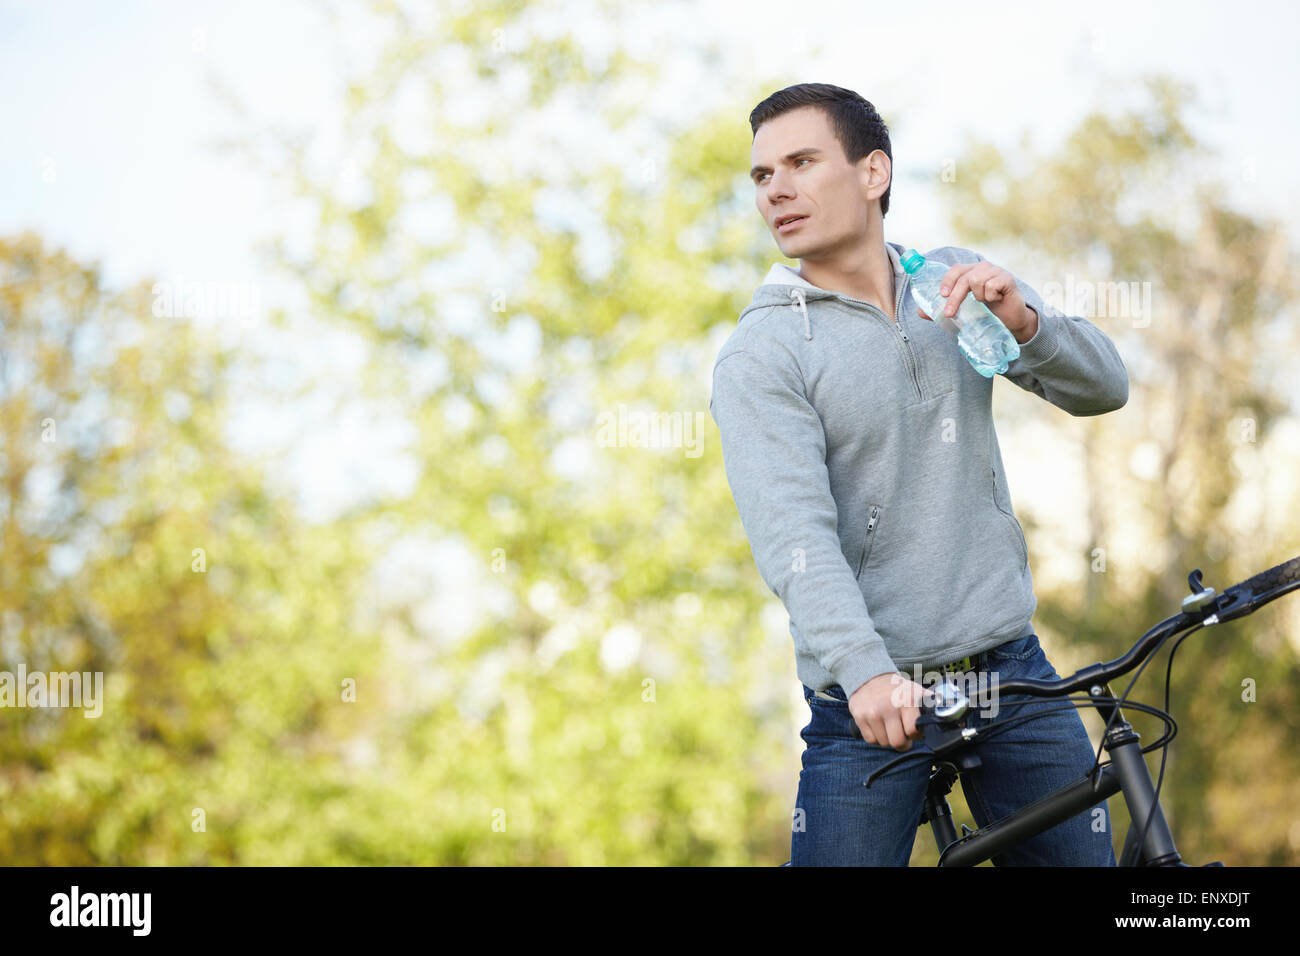 Young attractive man on a bicycle drink water Stock Photo